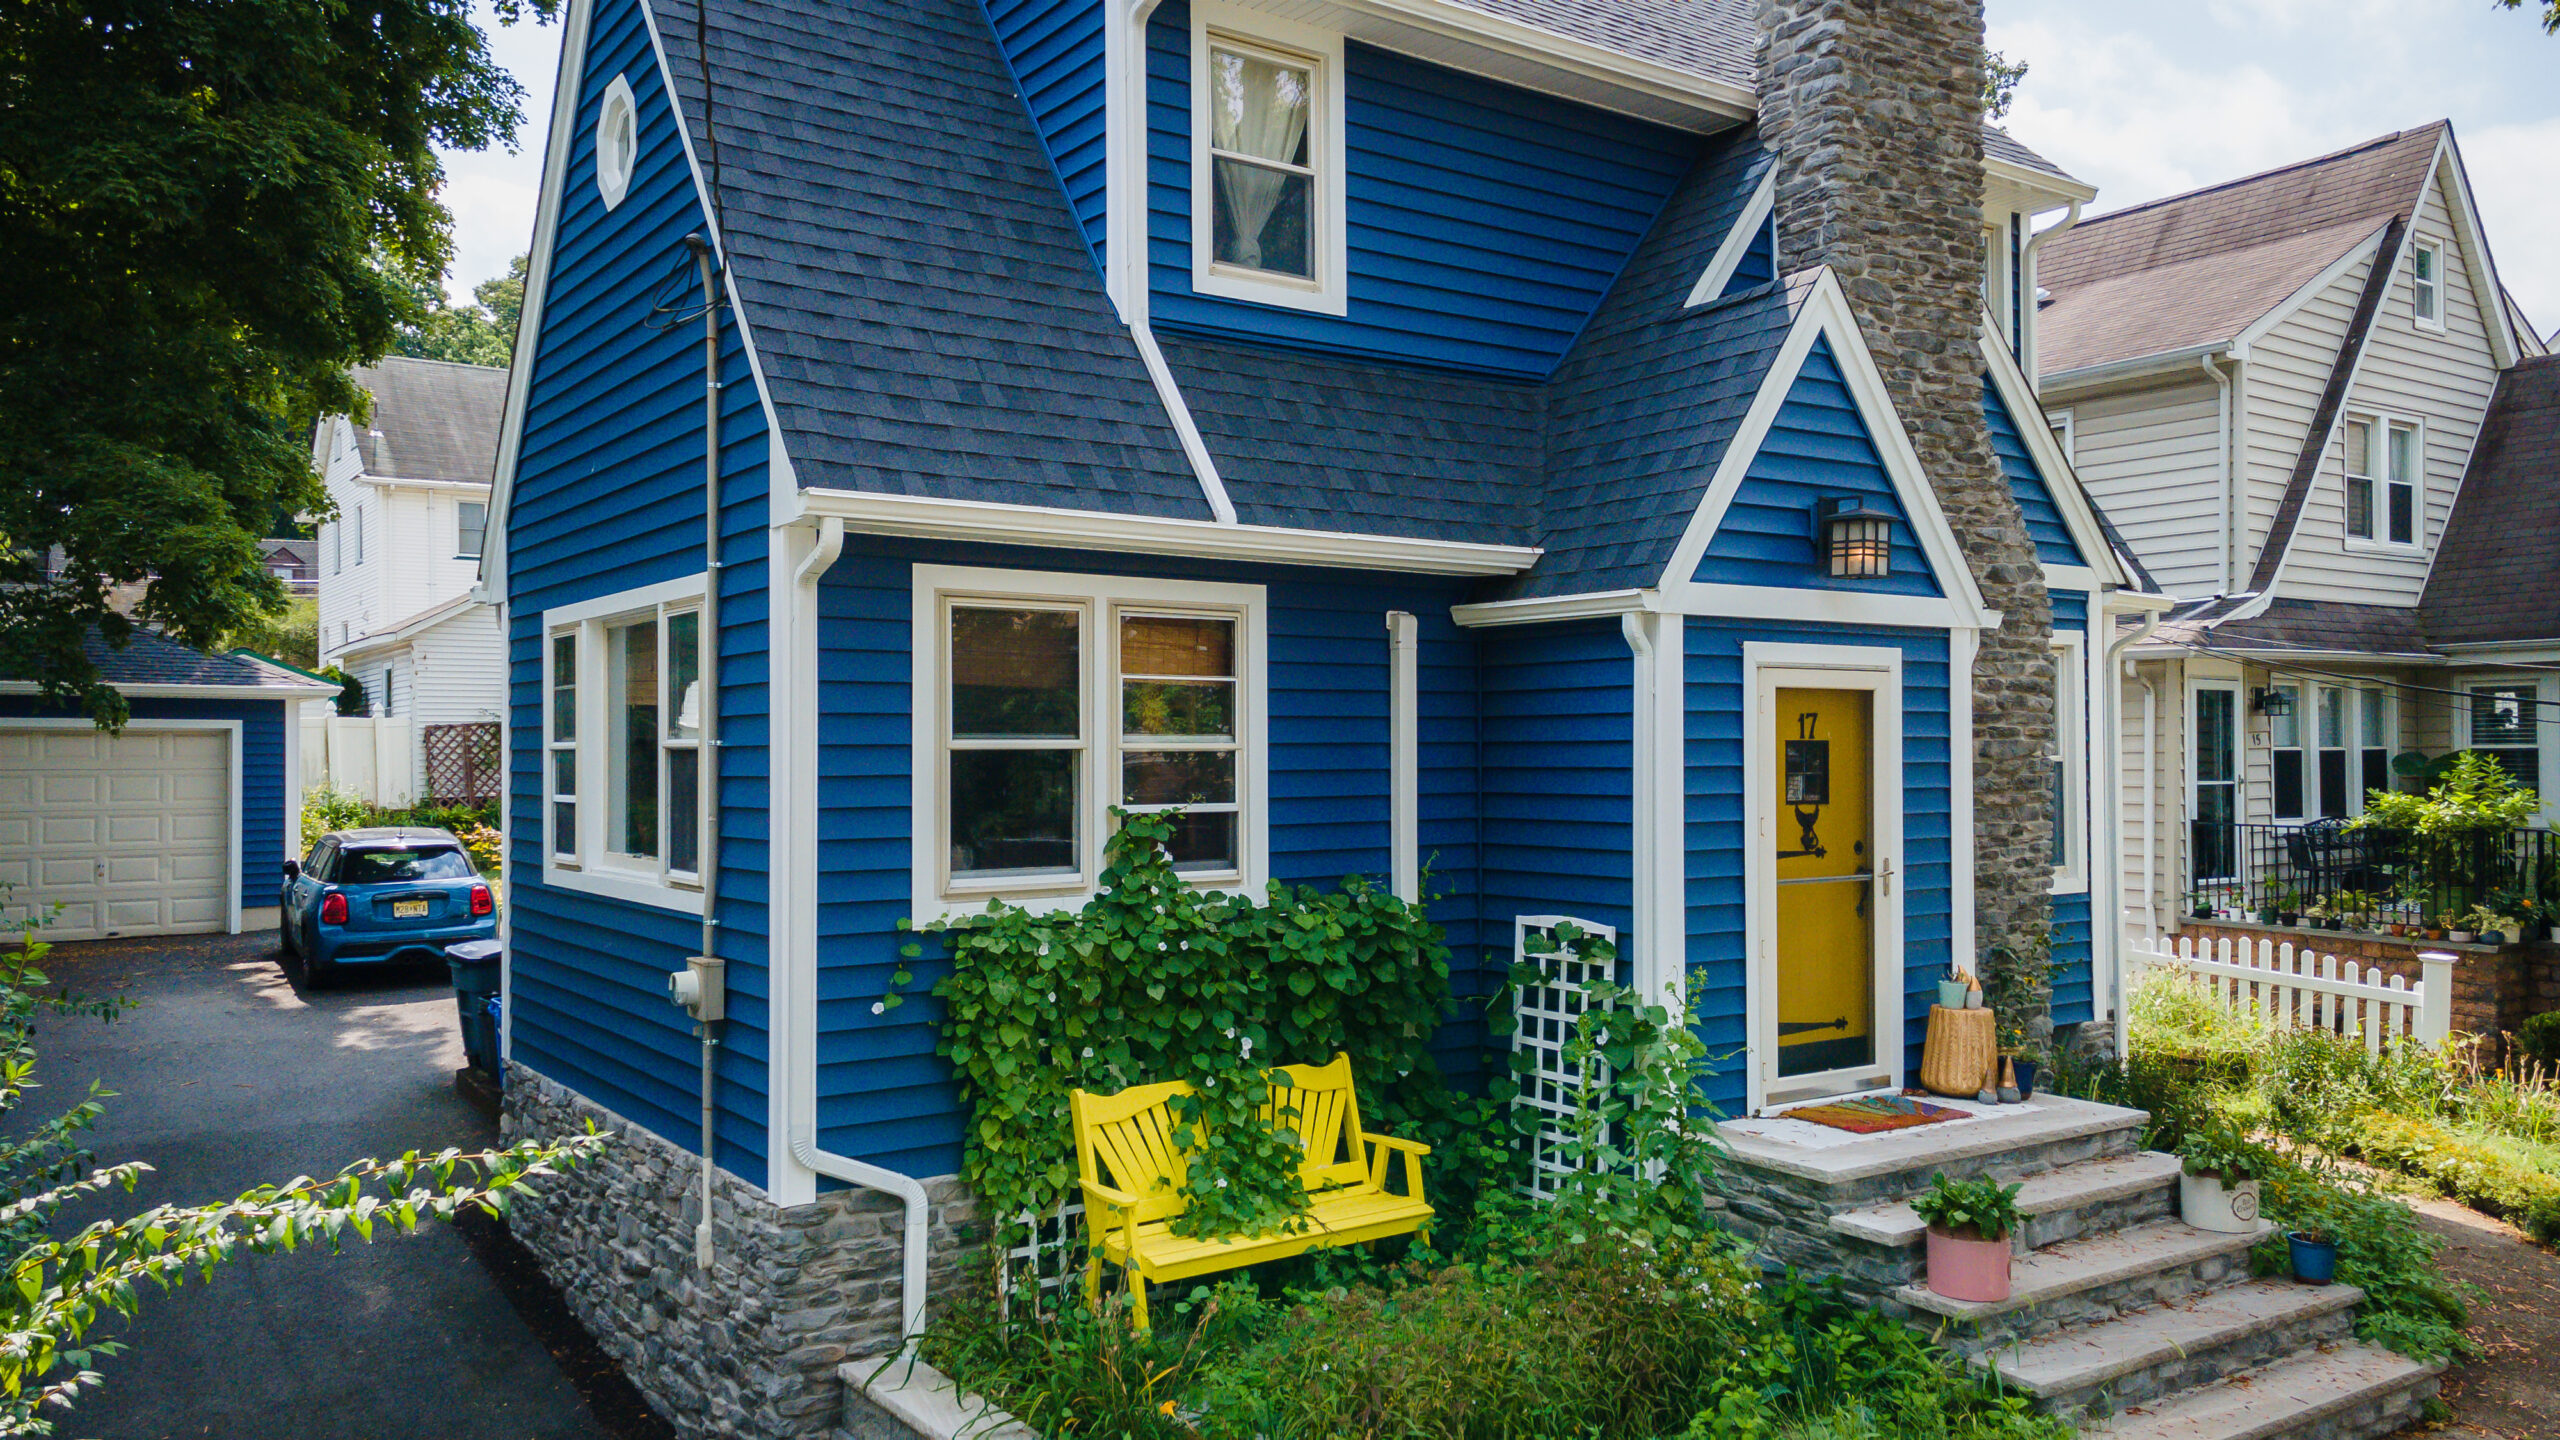 A blue house with a yellow door.